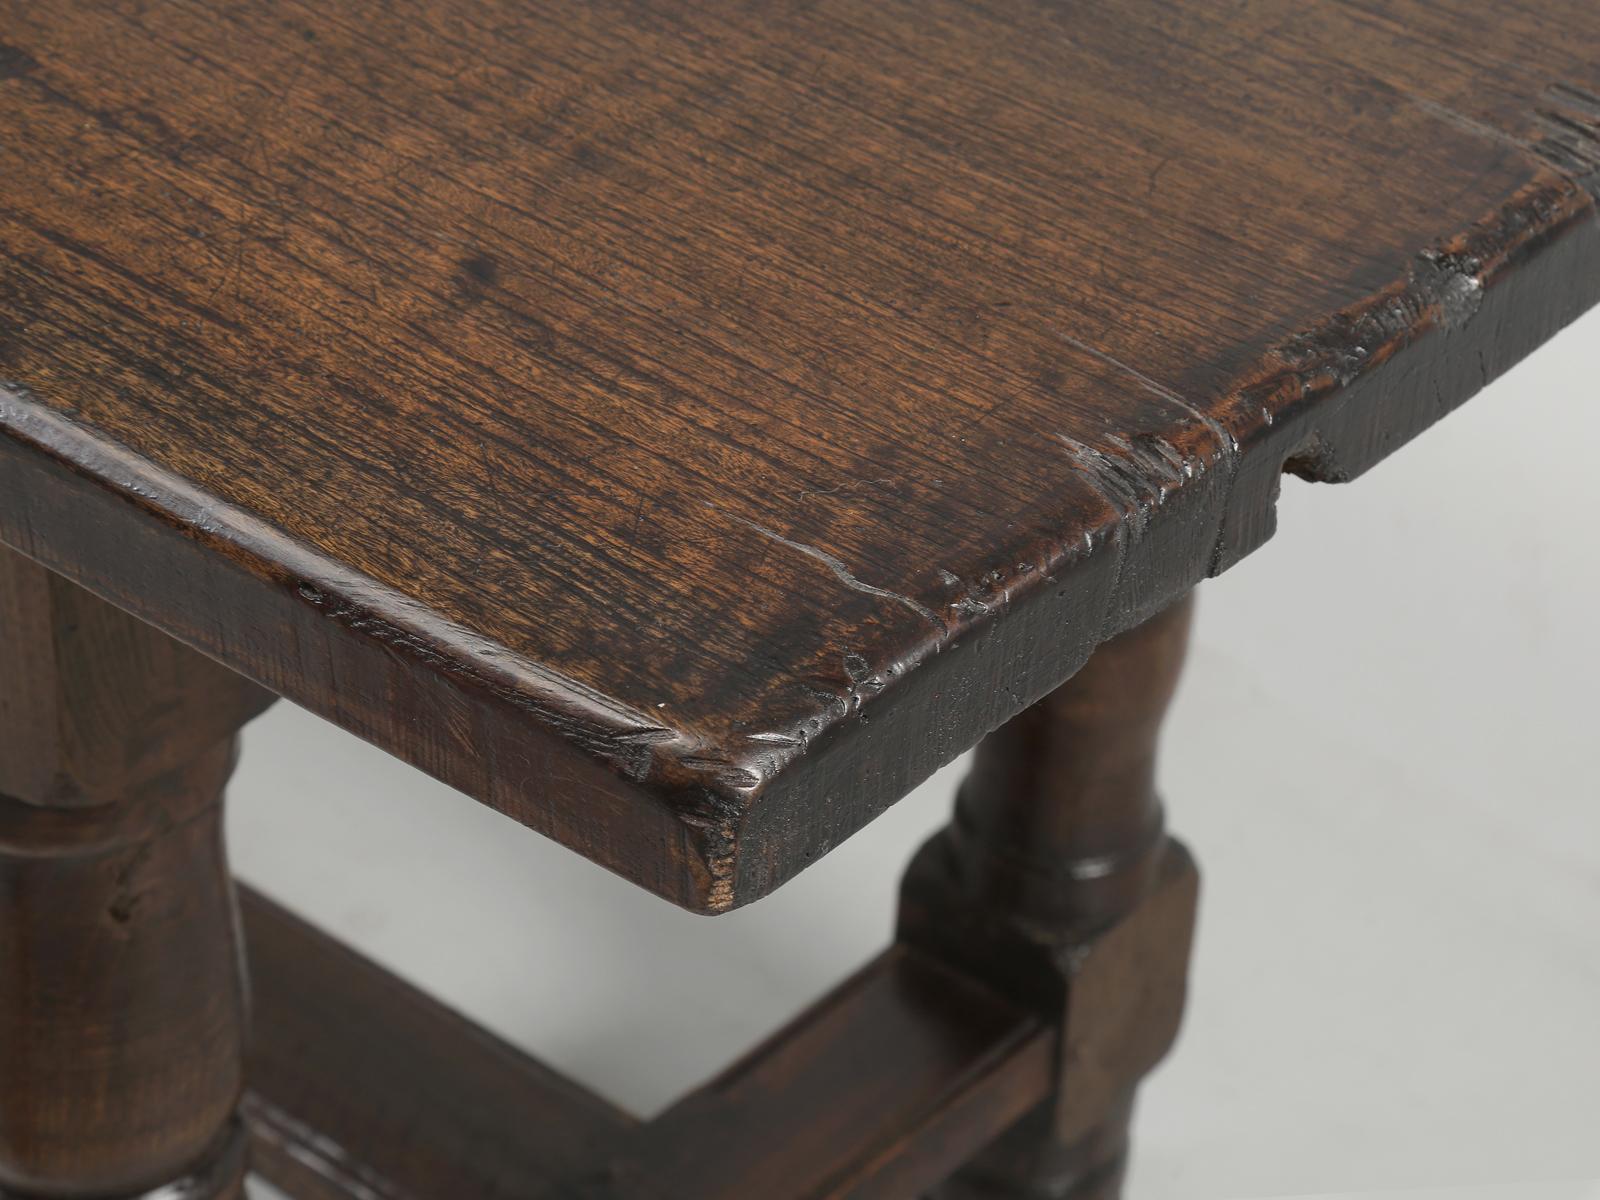 Hand-Crafted Antique French Farm Table or Dining Table with a One-Piece Top and Two Drawers